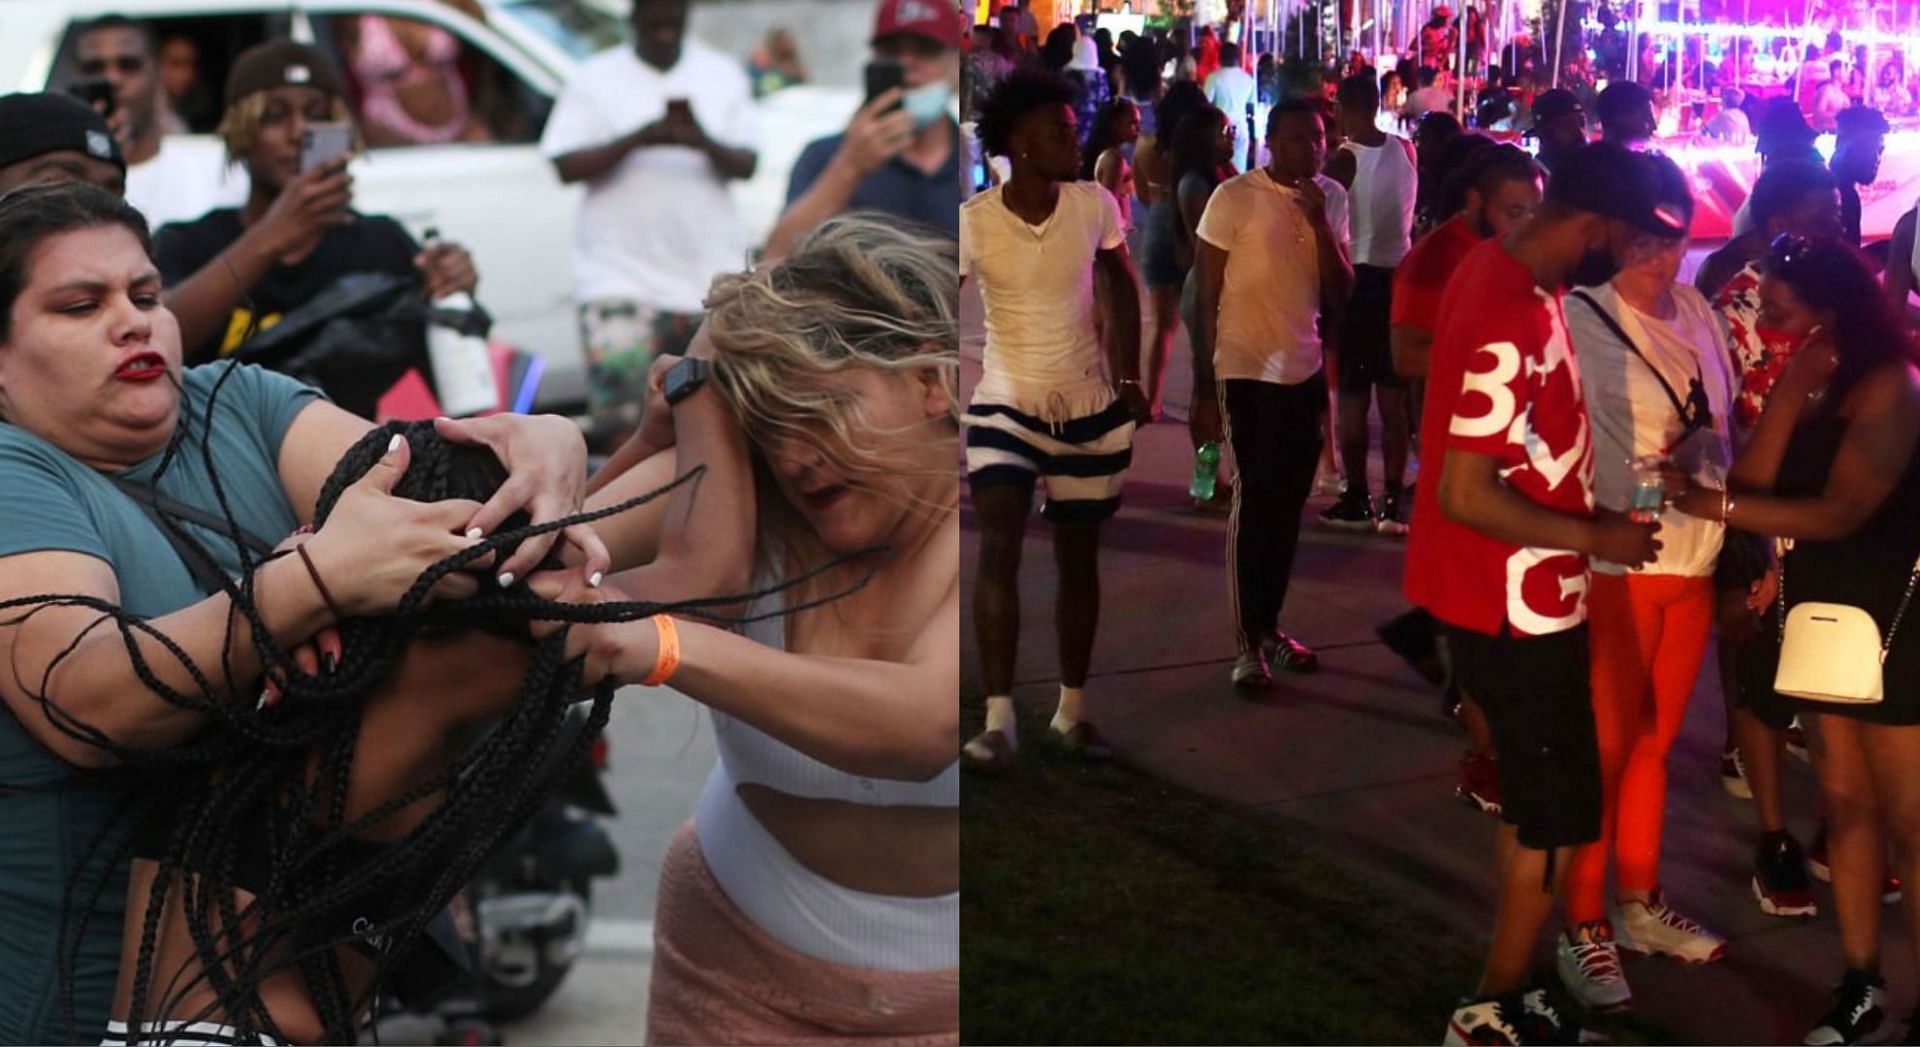 Miami Beach city officials implemented curfew following fatal shootings and crowd chaos during Spring Break 2023 (Image via Getty Images)